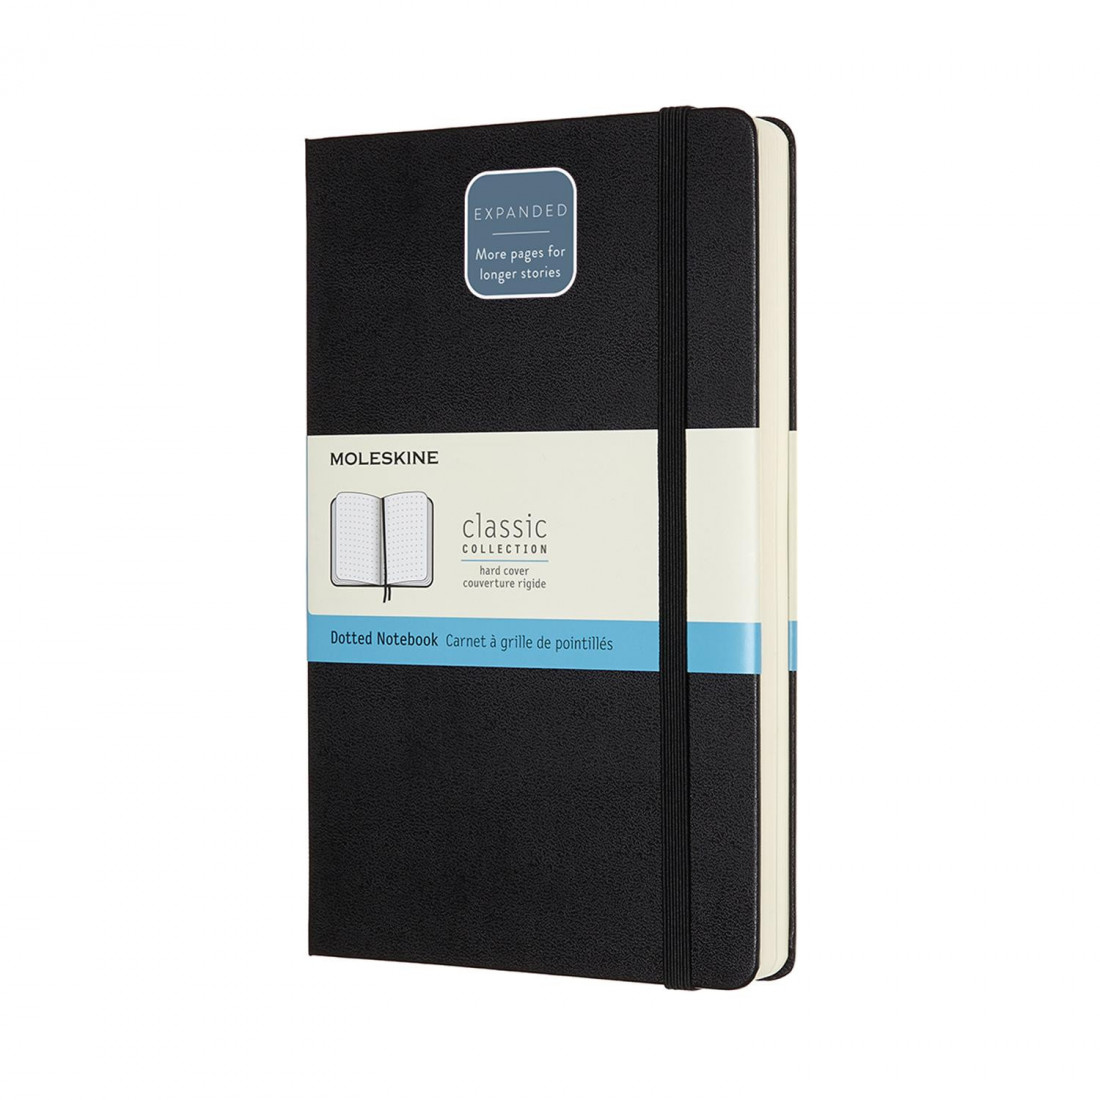 Moleskine Notebook Large 13x21 Dotted Expanded Version Black Hard Cover